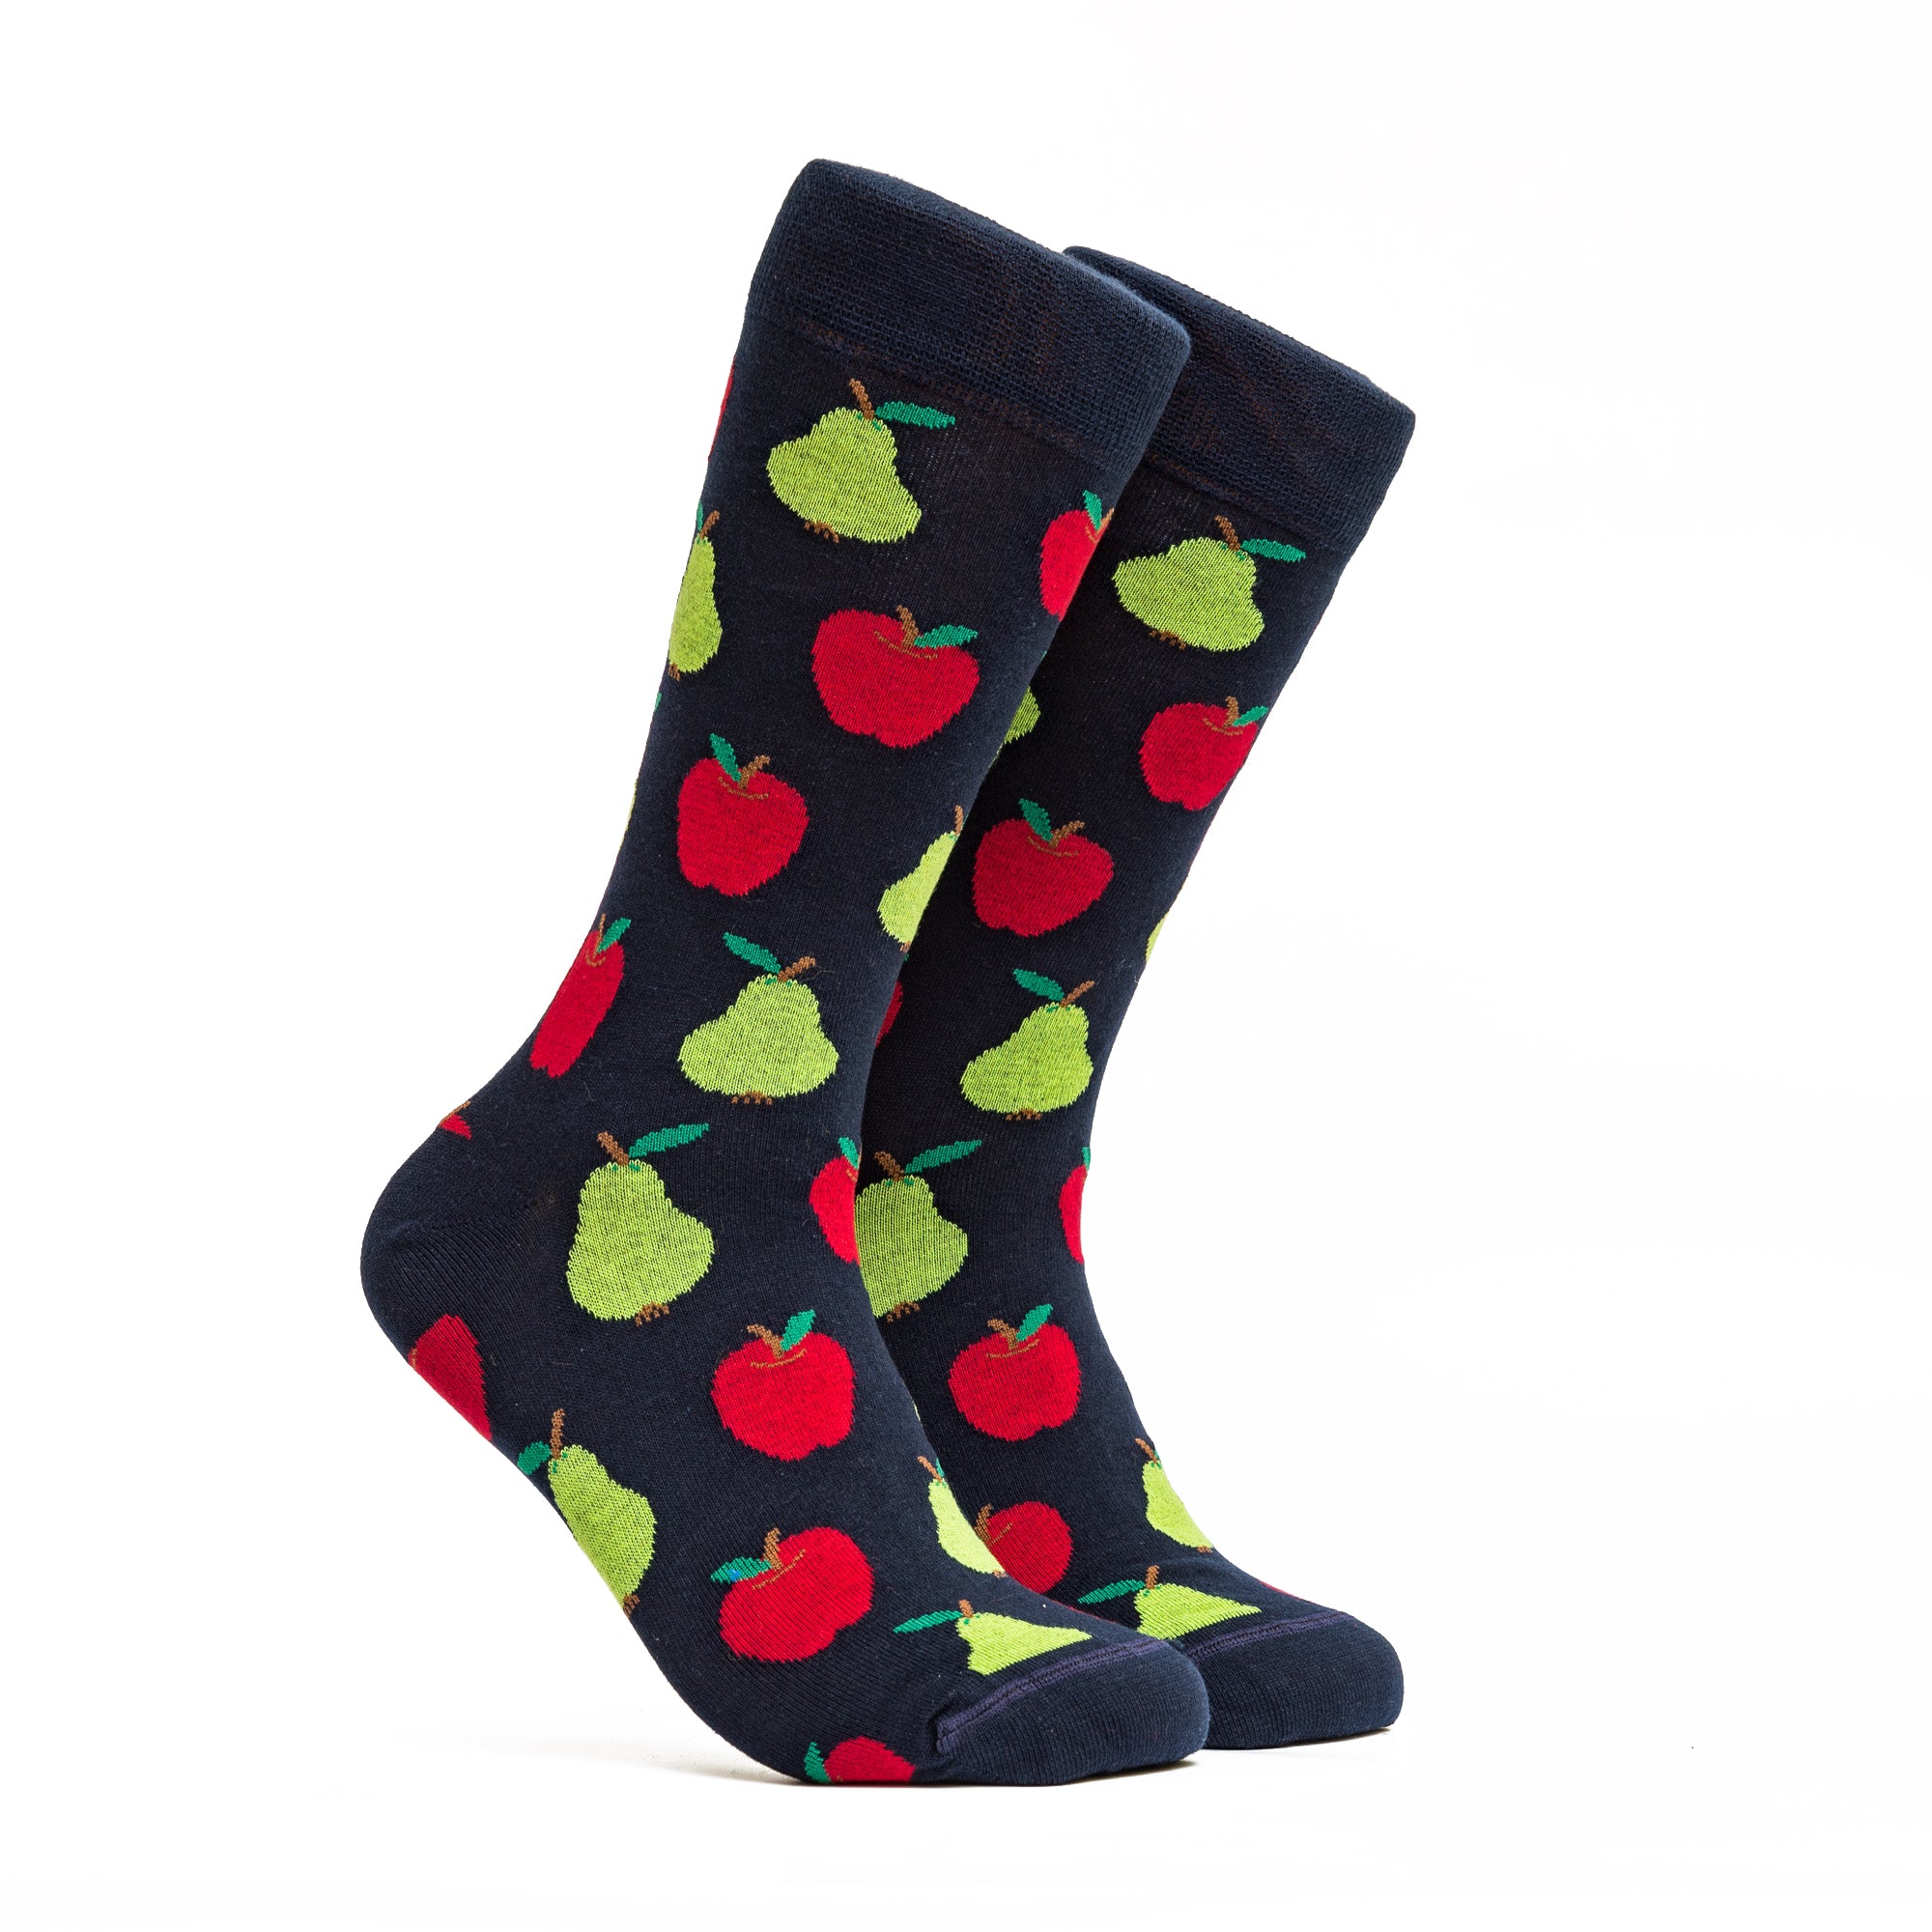 Fruits and Figures 2 Combo - Colors Black, Grey and Blue - 6 Pairs